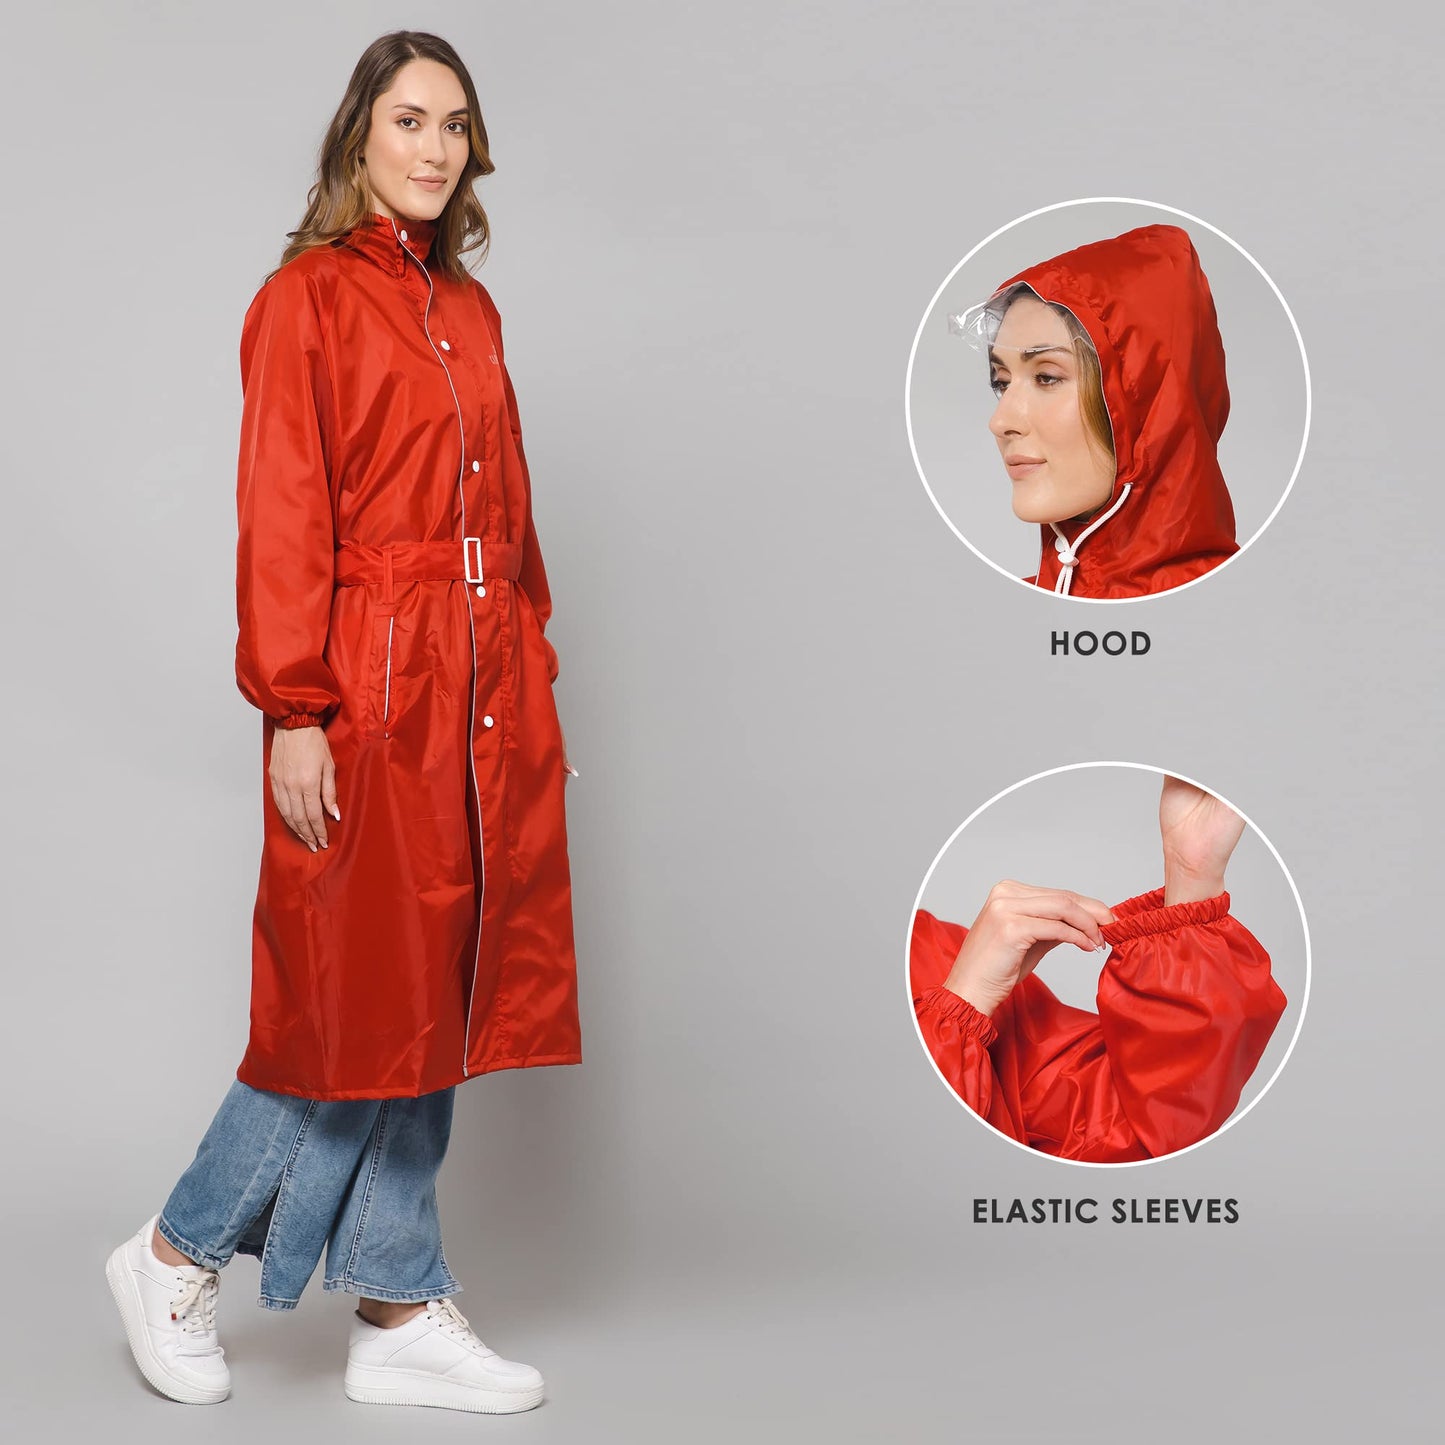 THE CLOWNFISH Polyester Long Length Raincoats For Women Rain Coat For Women Raincoat For Ladies Waterproof Reversible Double Layer. Drizzle Diva Series (Red, Xxx-Large)